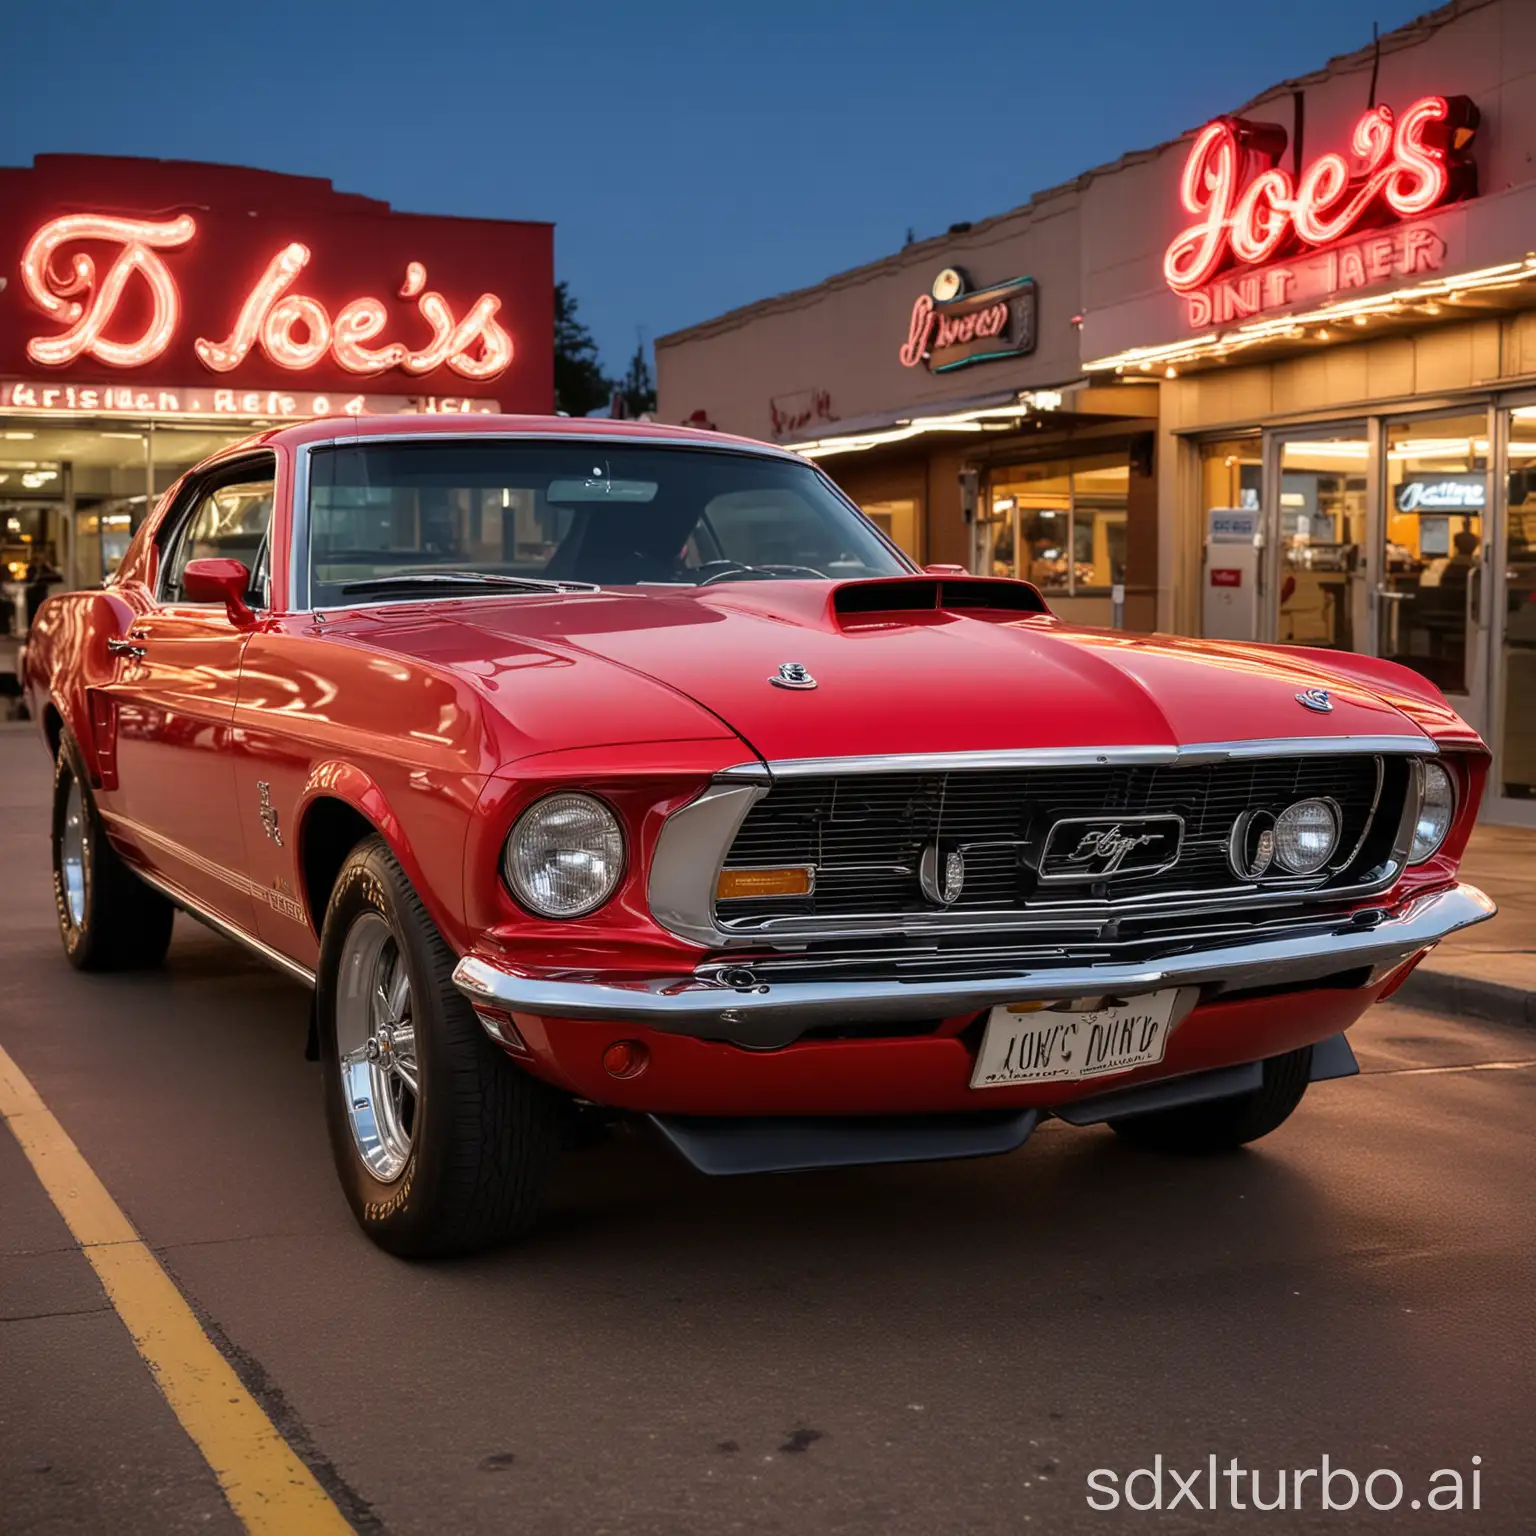 Vintage-Red-1969-Ford-Mustang-Parked-at-Joes-Diner